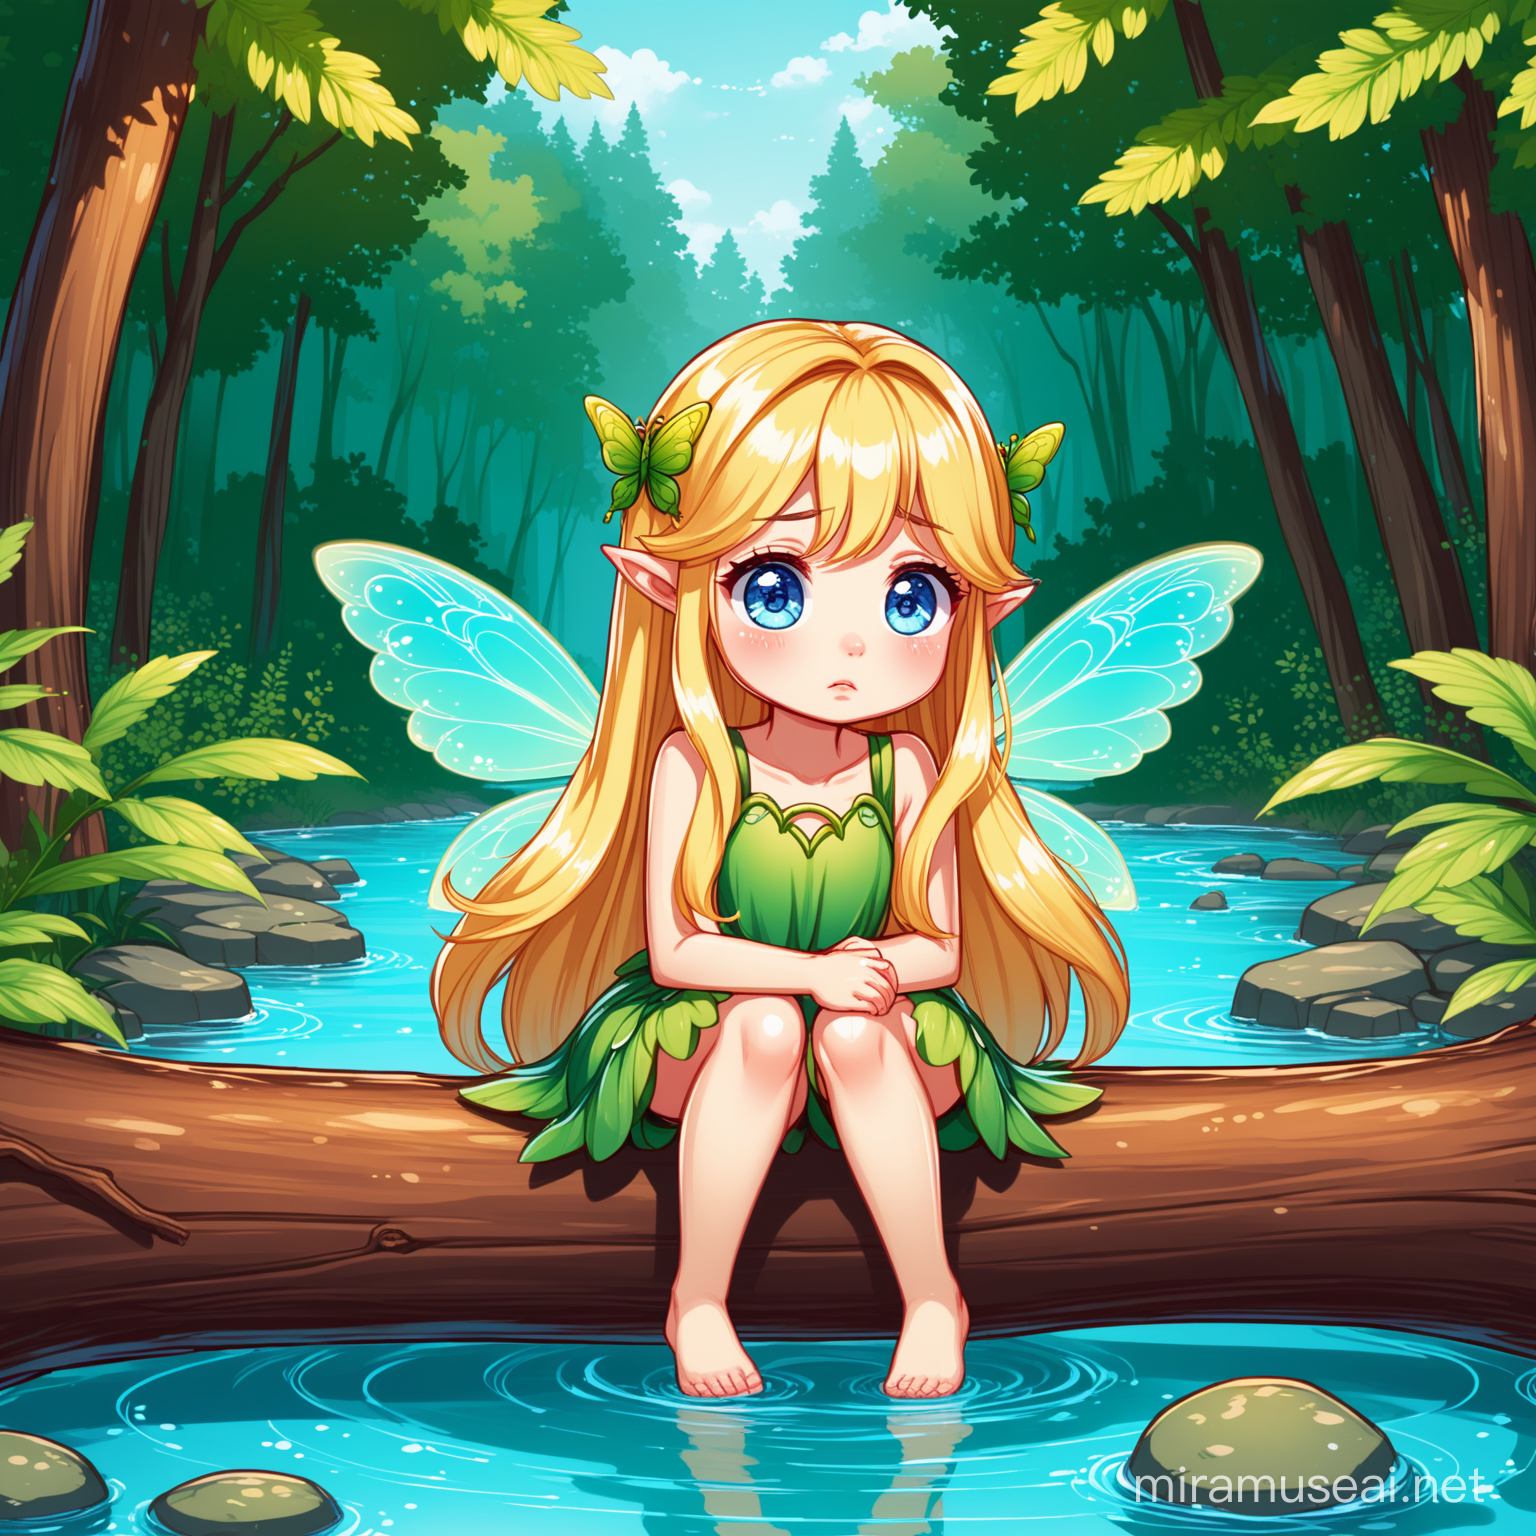 imagine poseable prompts, small forest fairy in cartoon style with long blonde hair and big blue eyes, sad,sitting on a log by a creek ,  no background